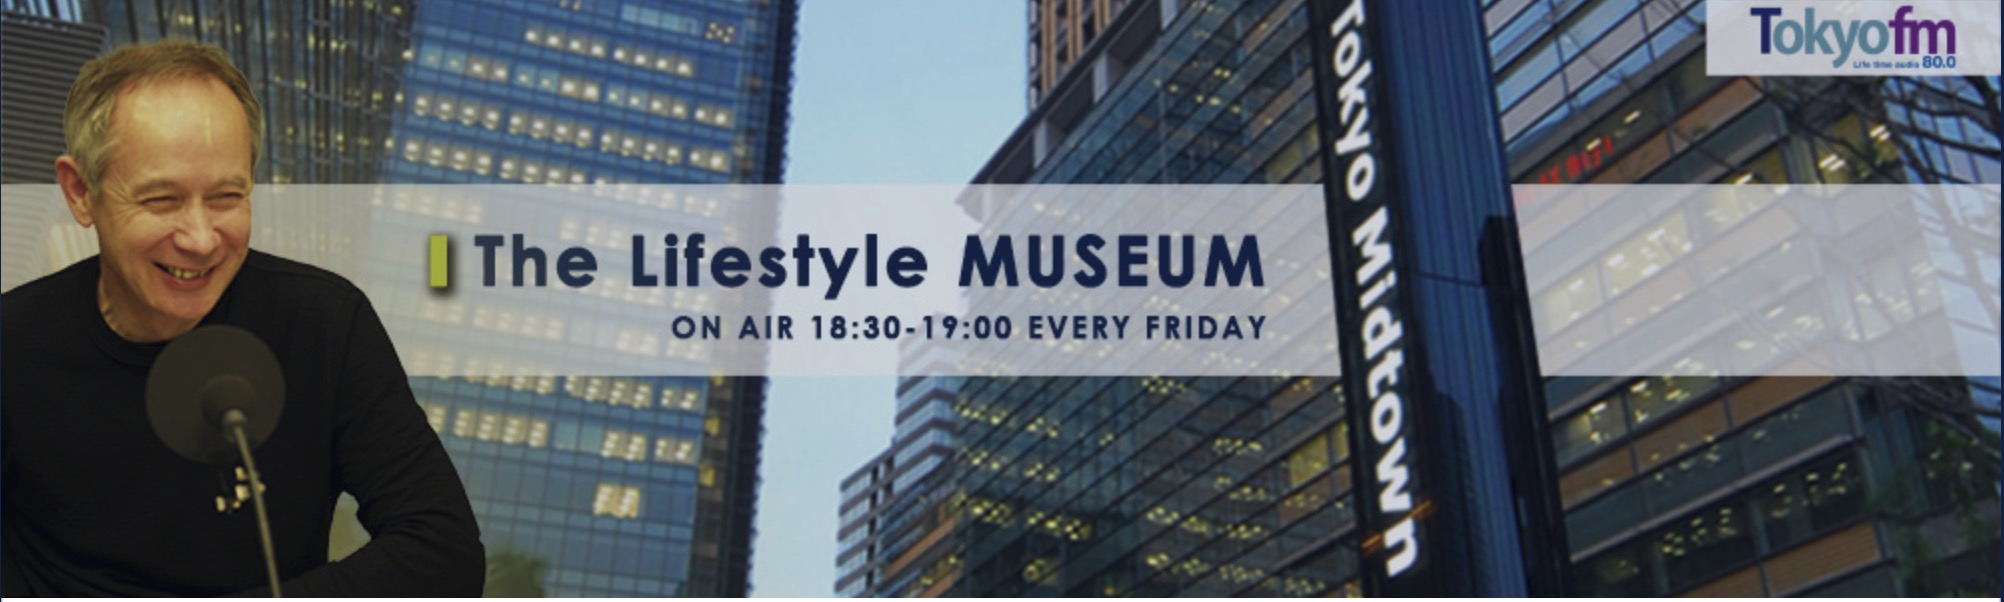 TOKYO FM「The Lifestyle MUSEUM」出演